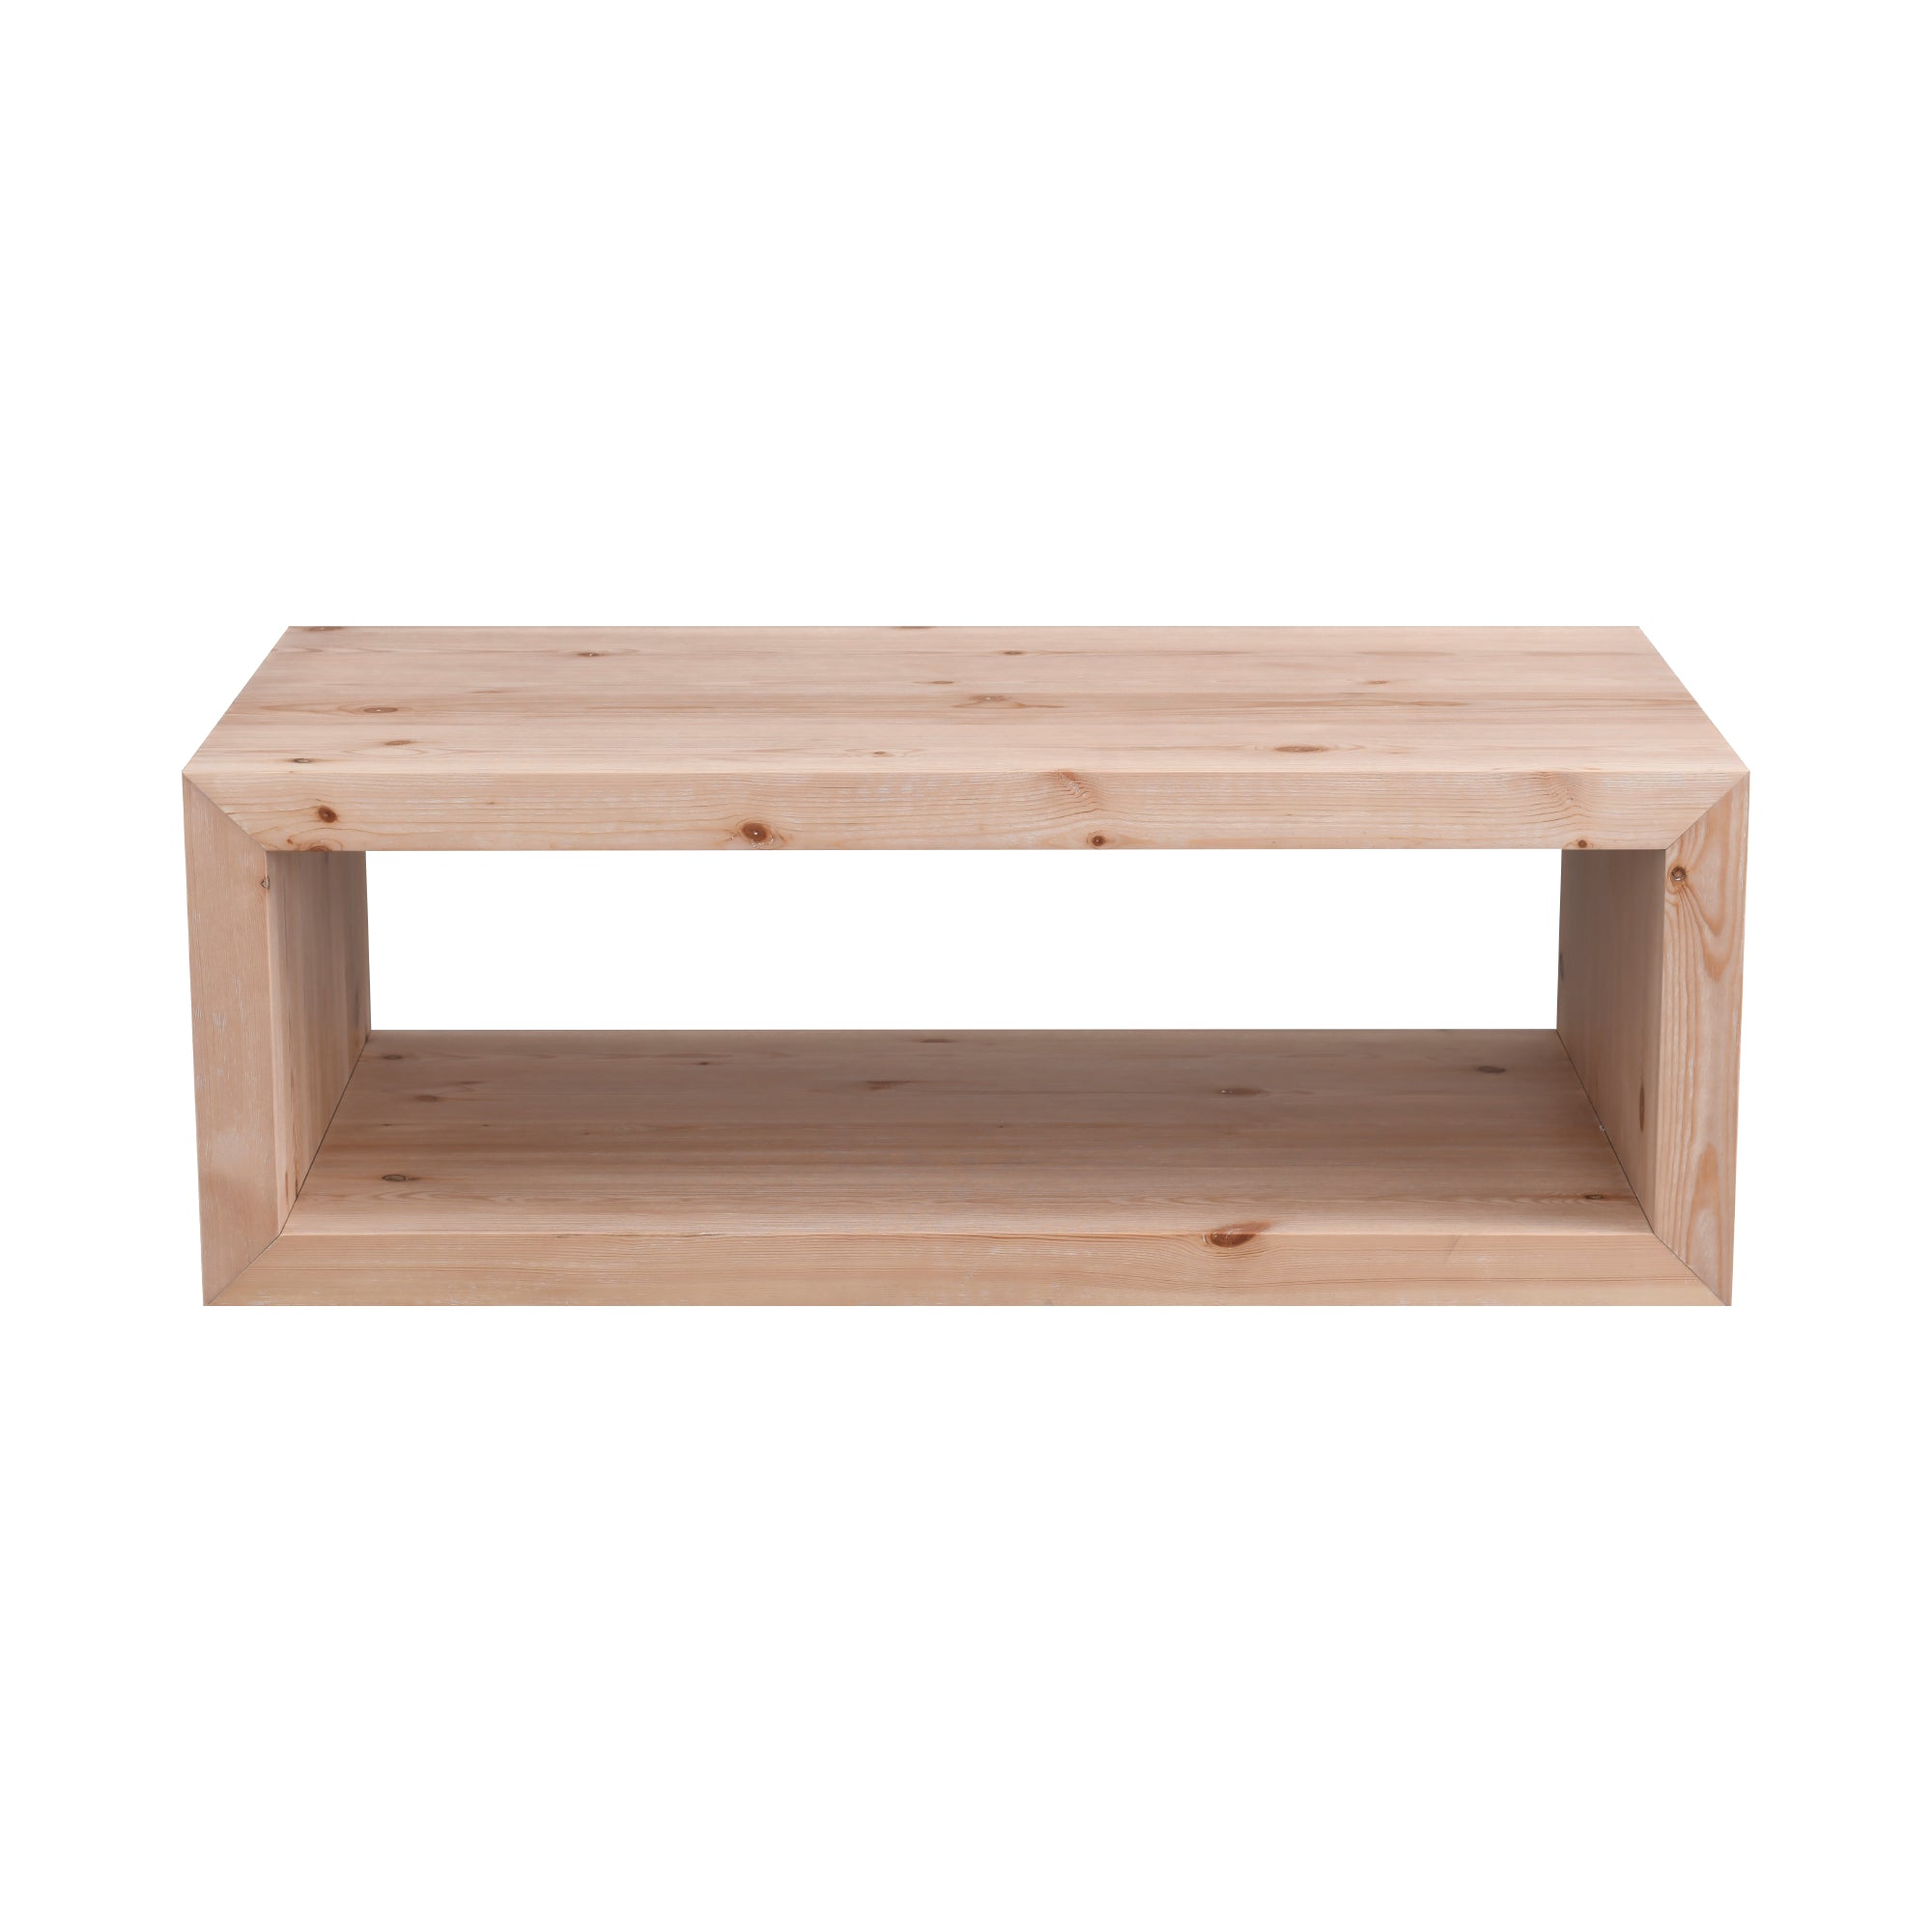 Pine wood coffee table with storage